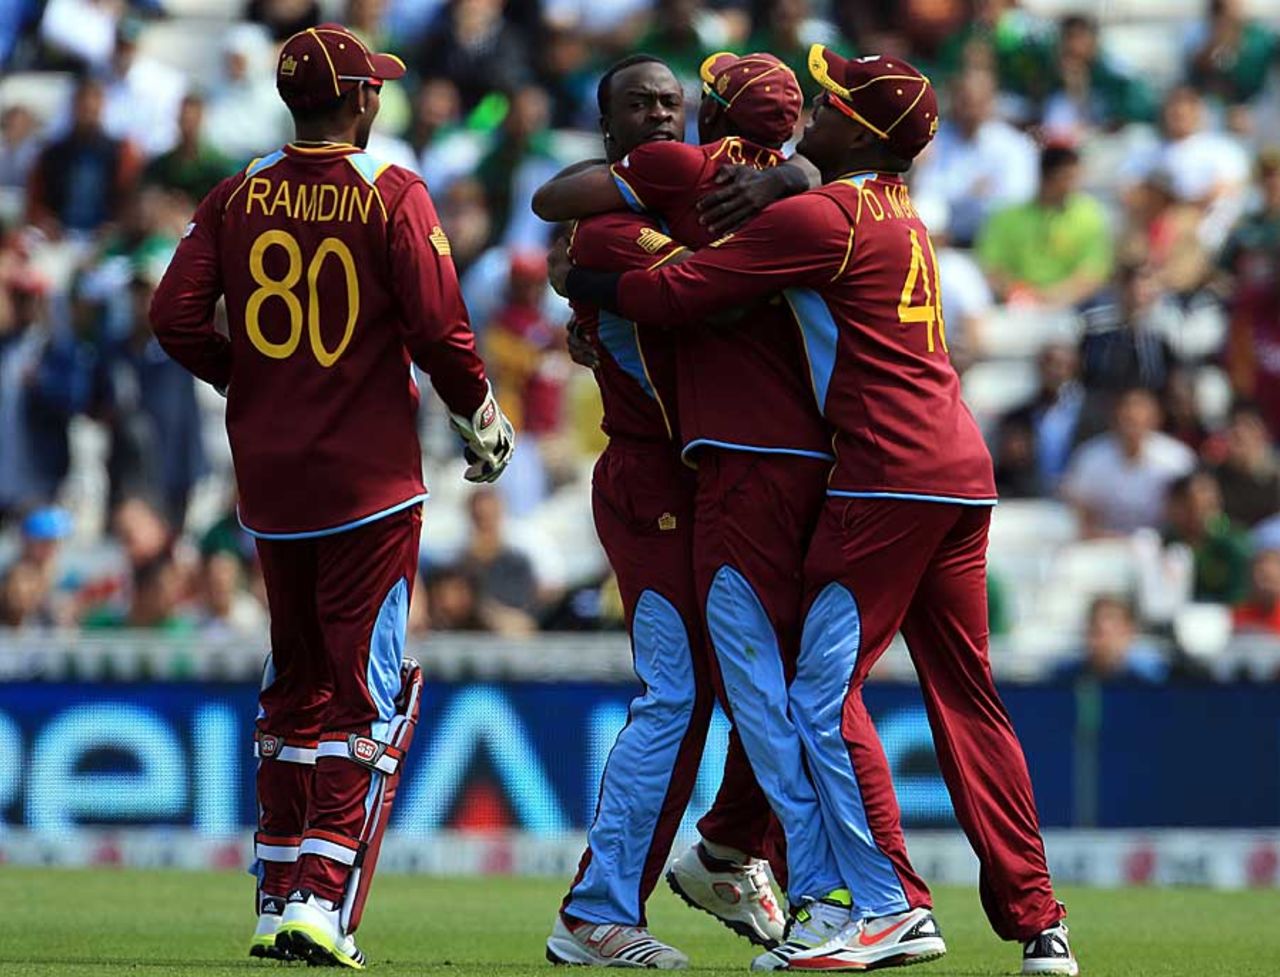 Kemar Roach picked up three early wickets, West Indies v Pakistan, Champions Trophy, Group B, The Oval, June 7, 2013